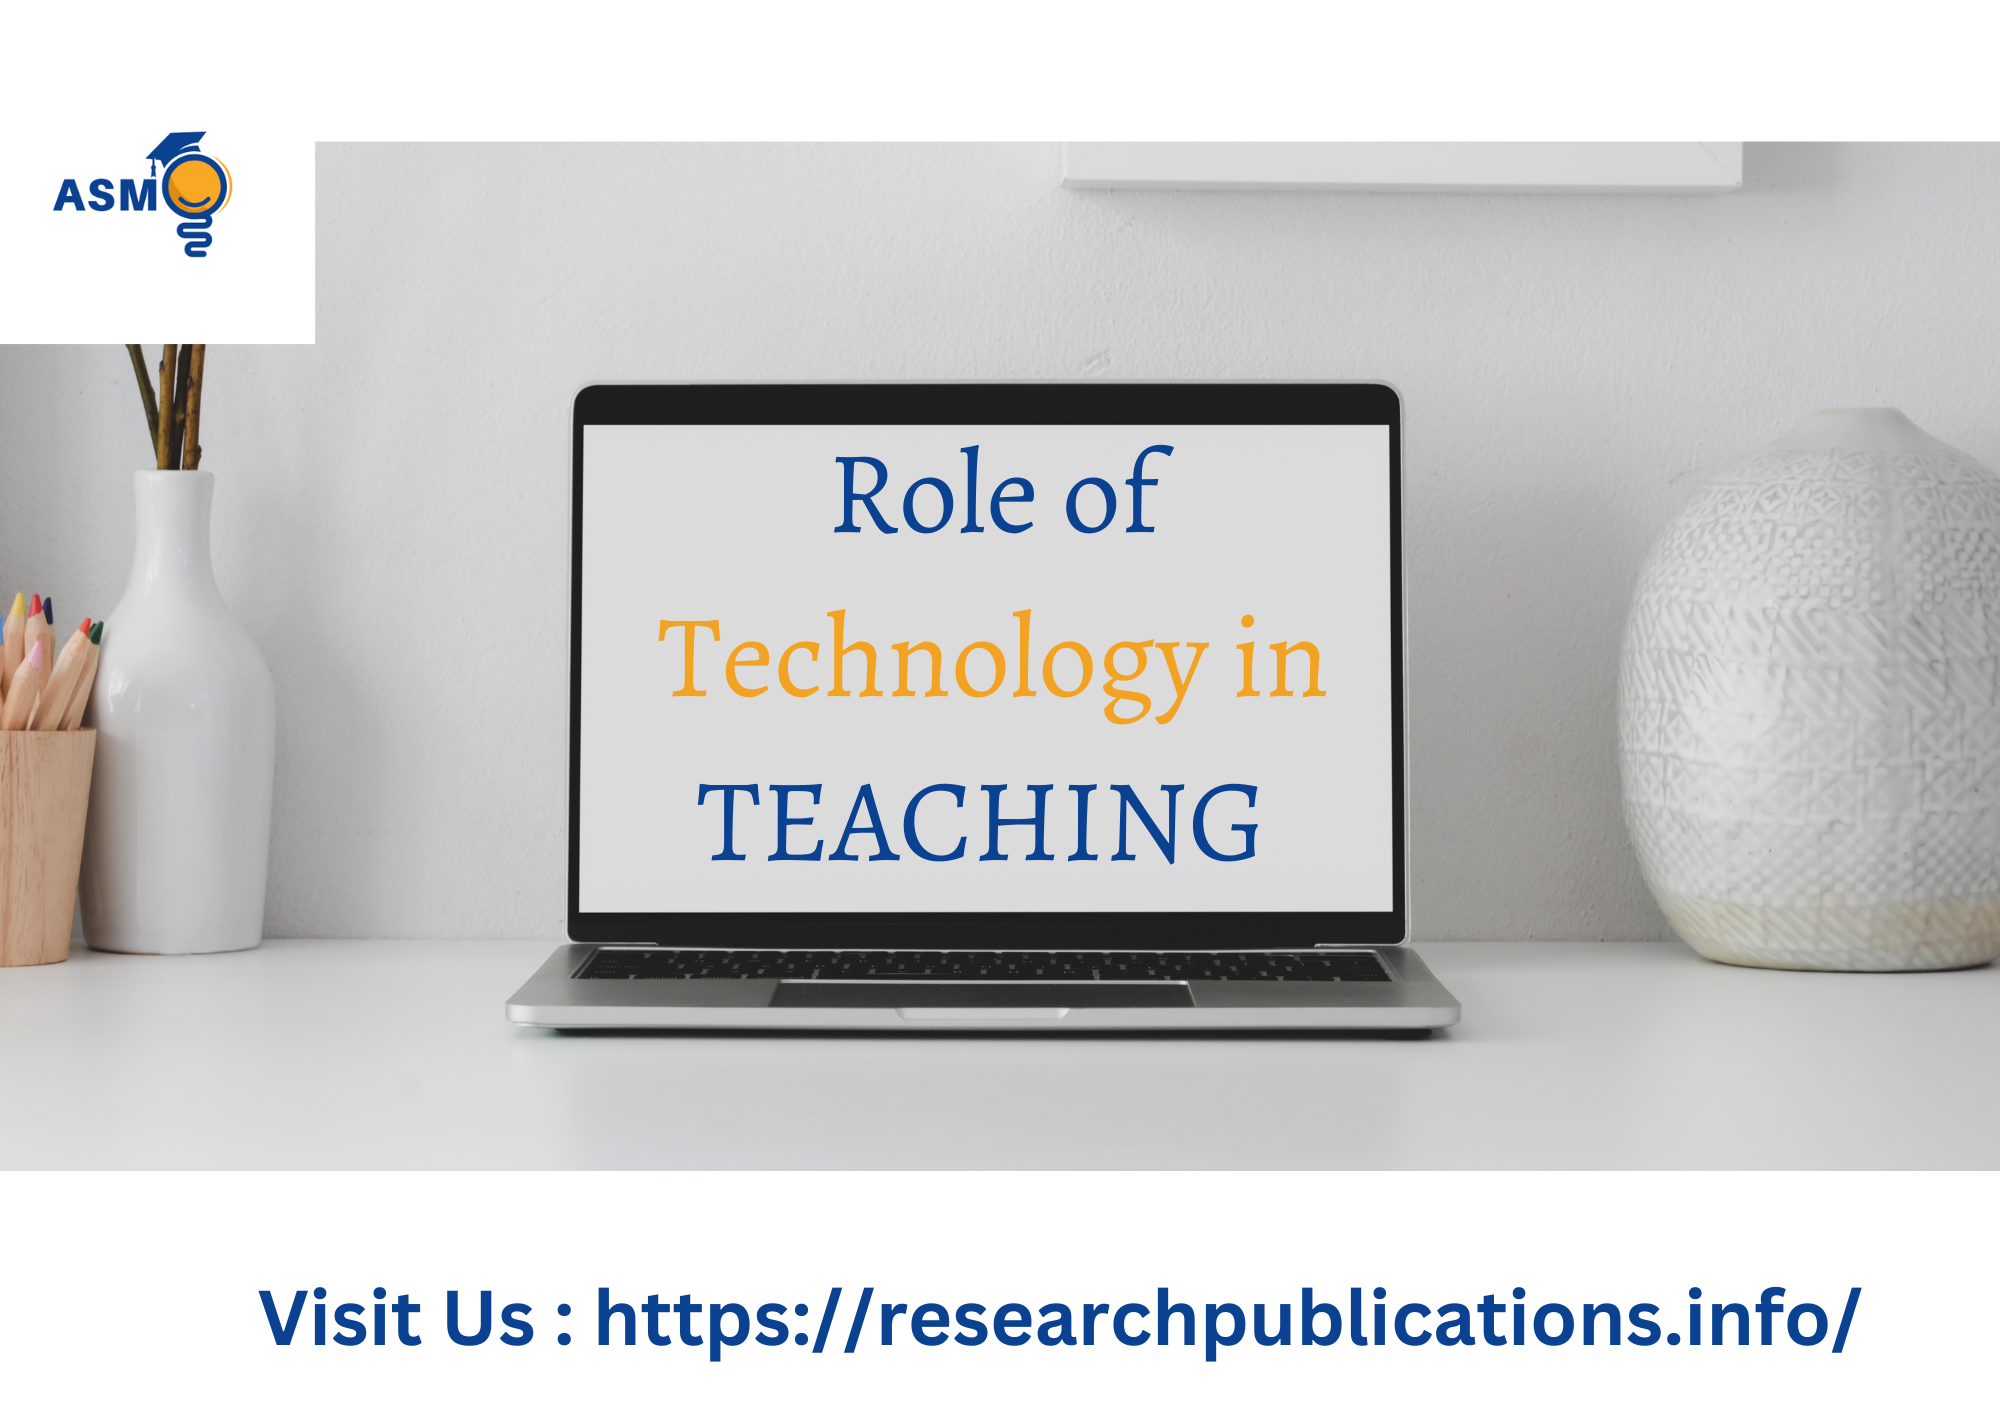 Technical issues Training, research activities. Institutions of higher education , Improved student learning, benefits to using technology in teaching and research, Facilitate communication and collaboration THE ROLE OF TECHNOLOGY IN SUPPORTING FACULTY TEACHING AND RESEARCH